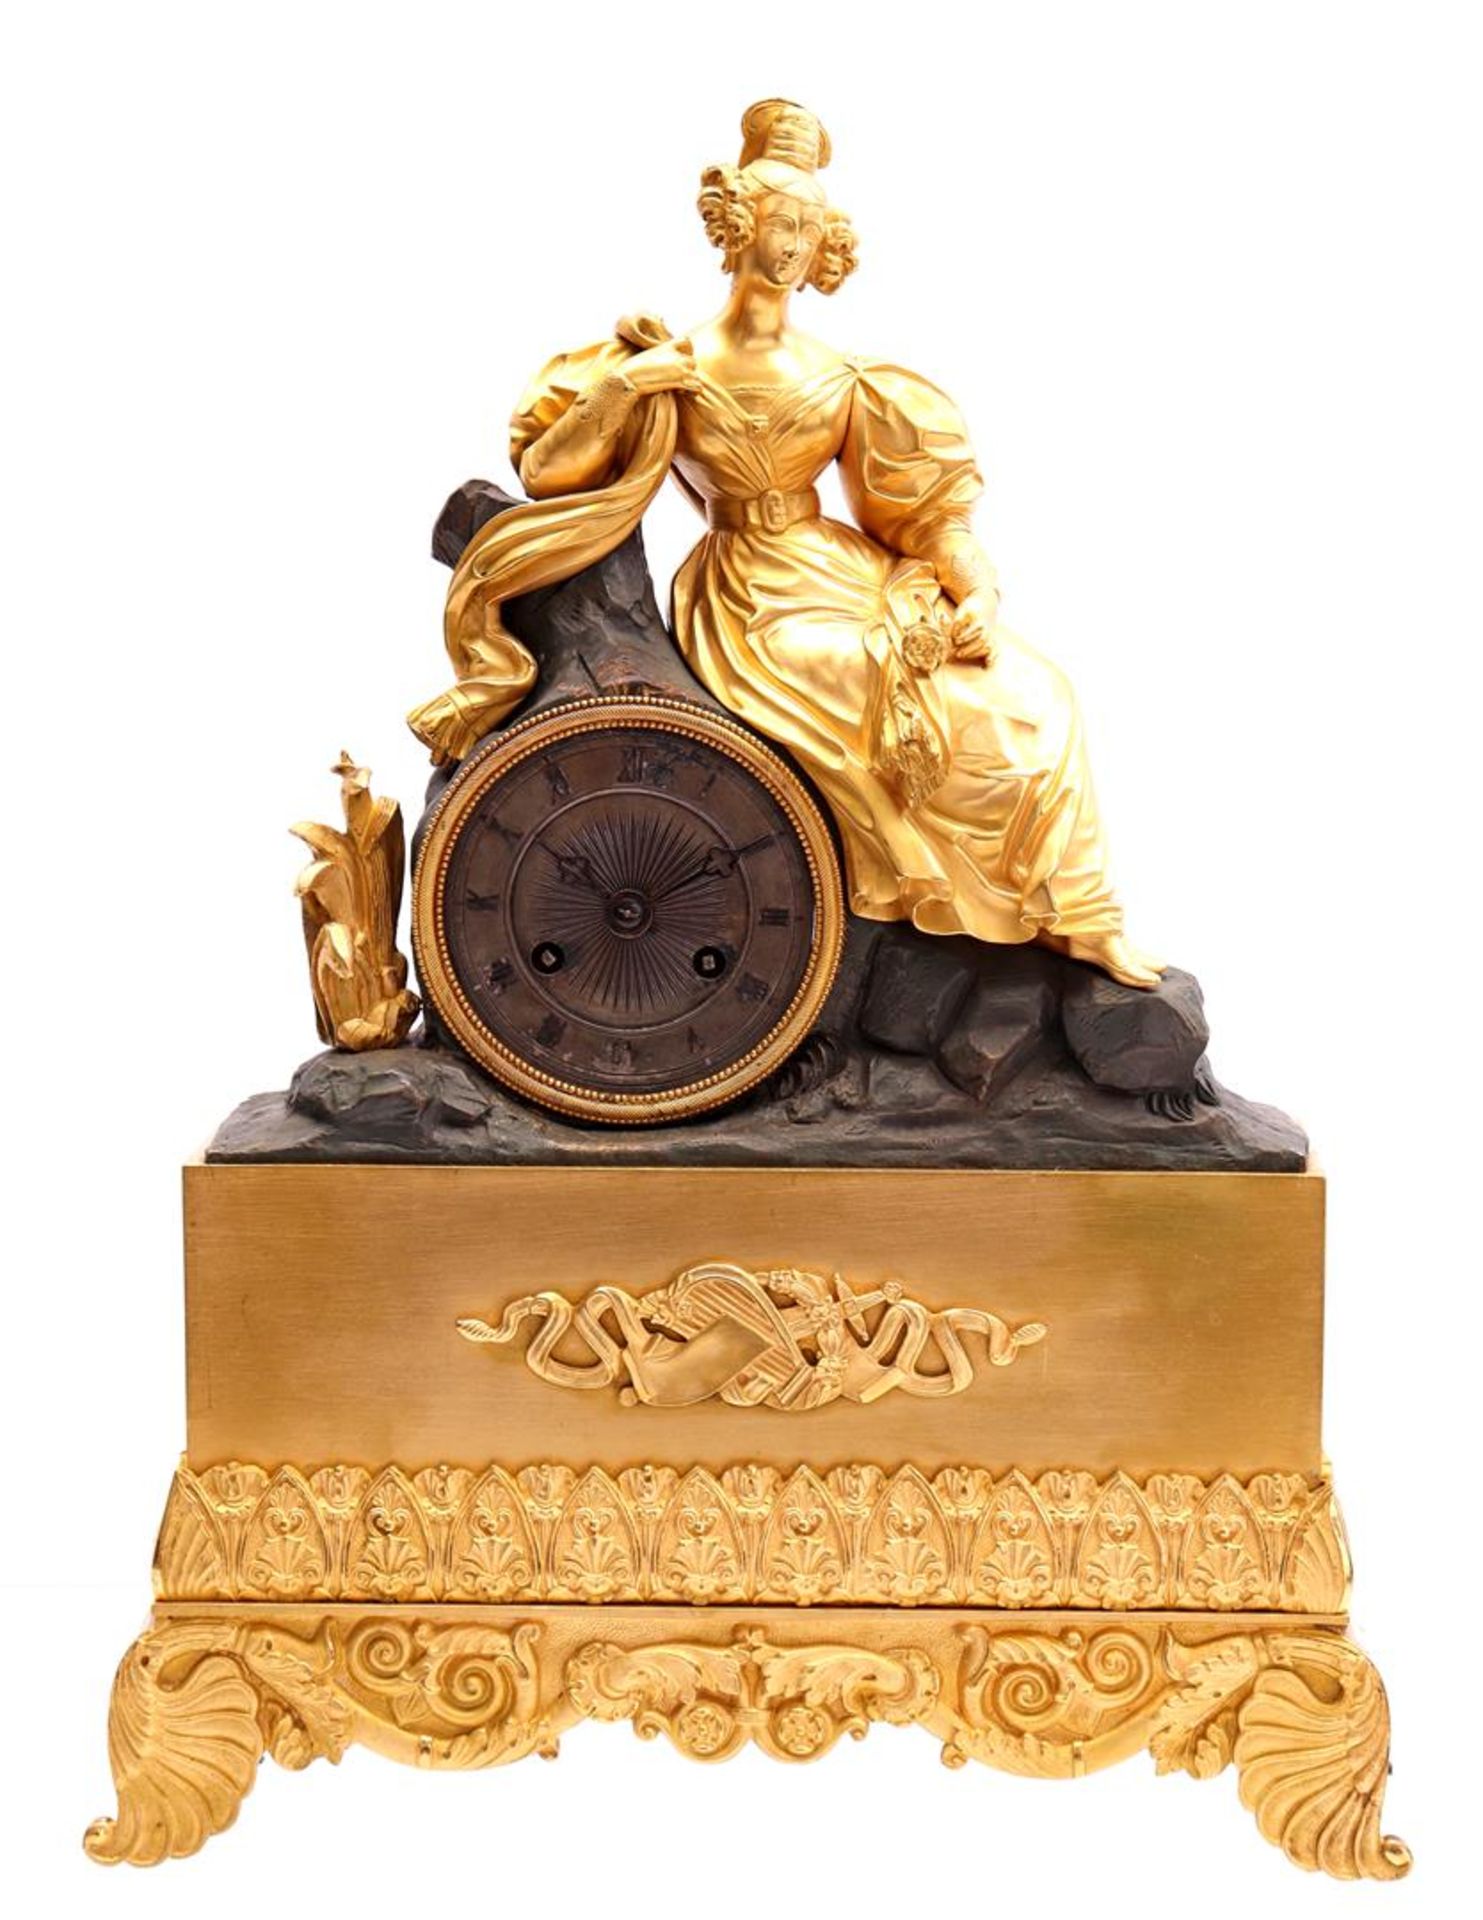 Fire-gilt bronze mantel clock with lady on top